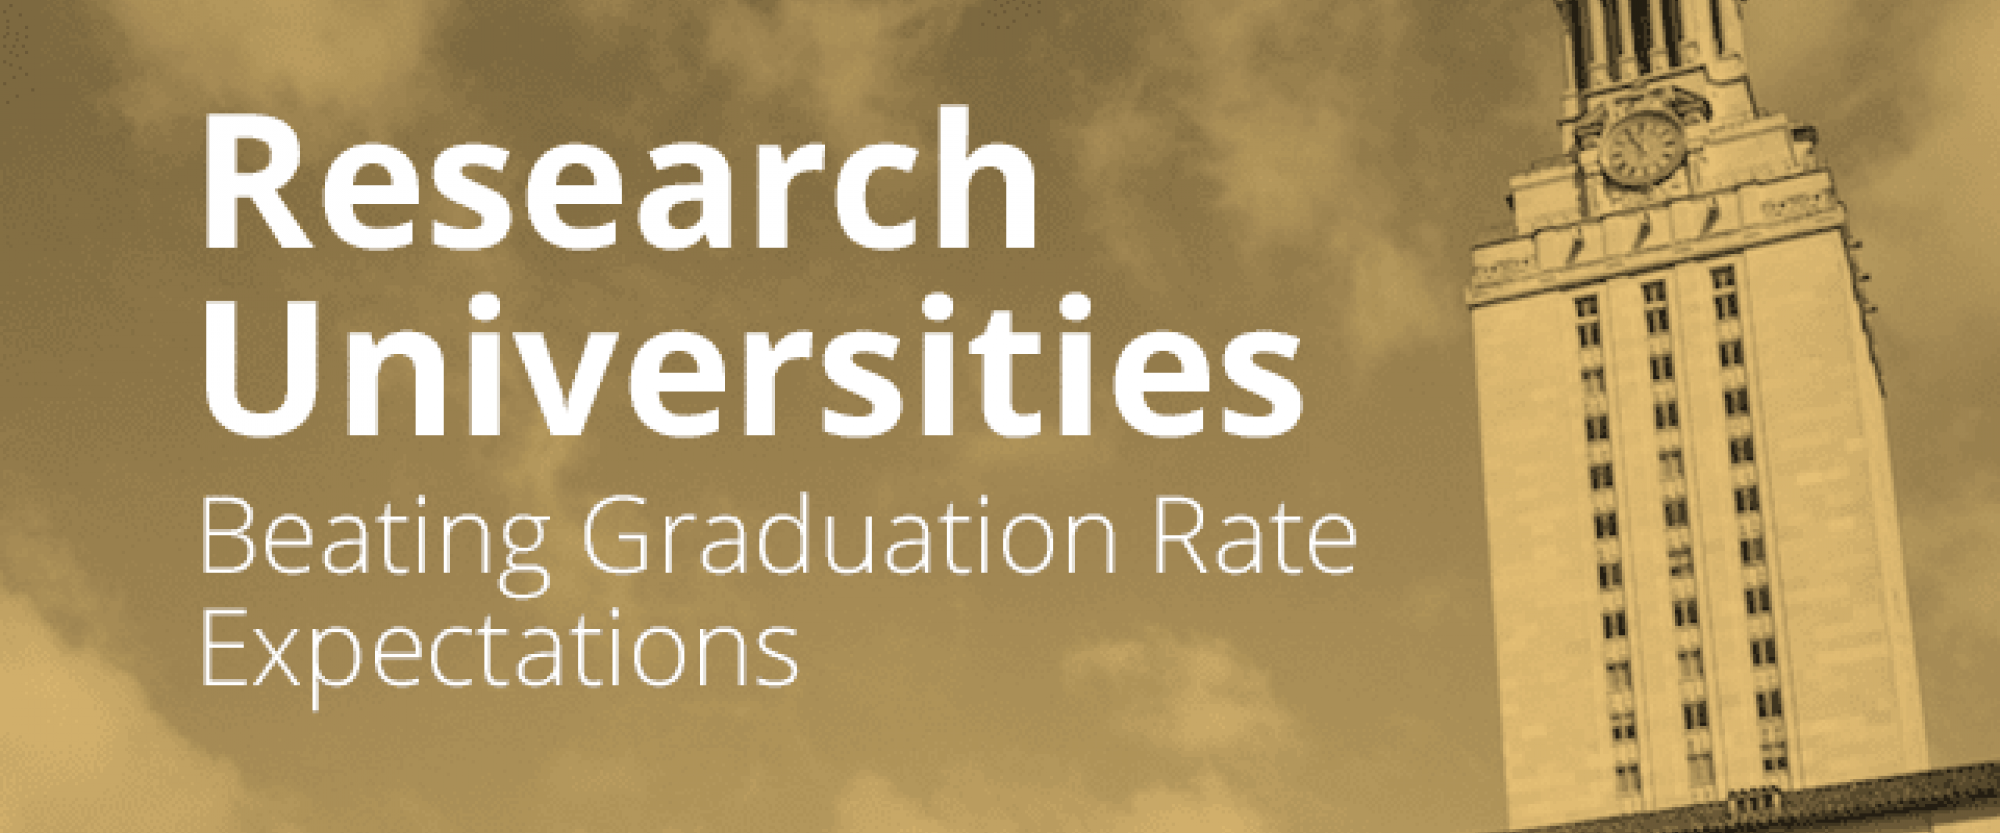 Research Universities Beating Graduation Rate Expectations as Foundations Double Down on Alliance